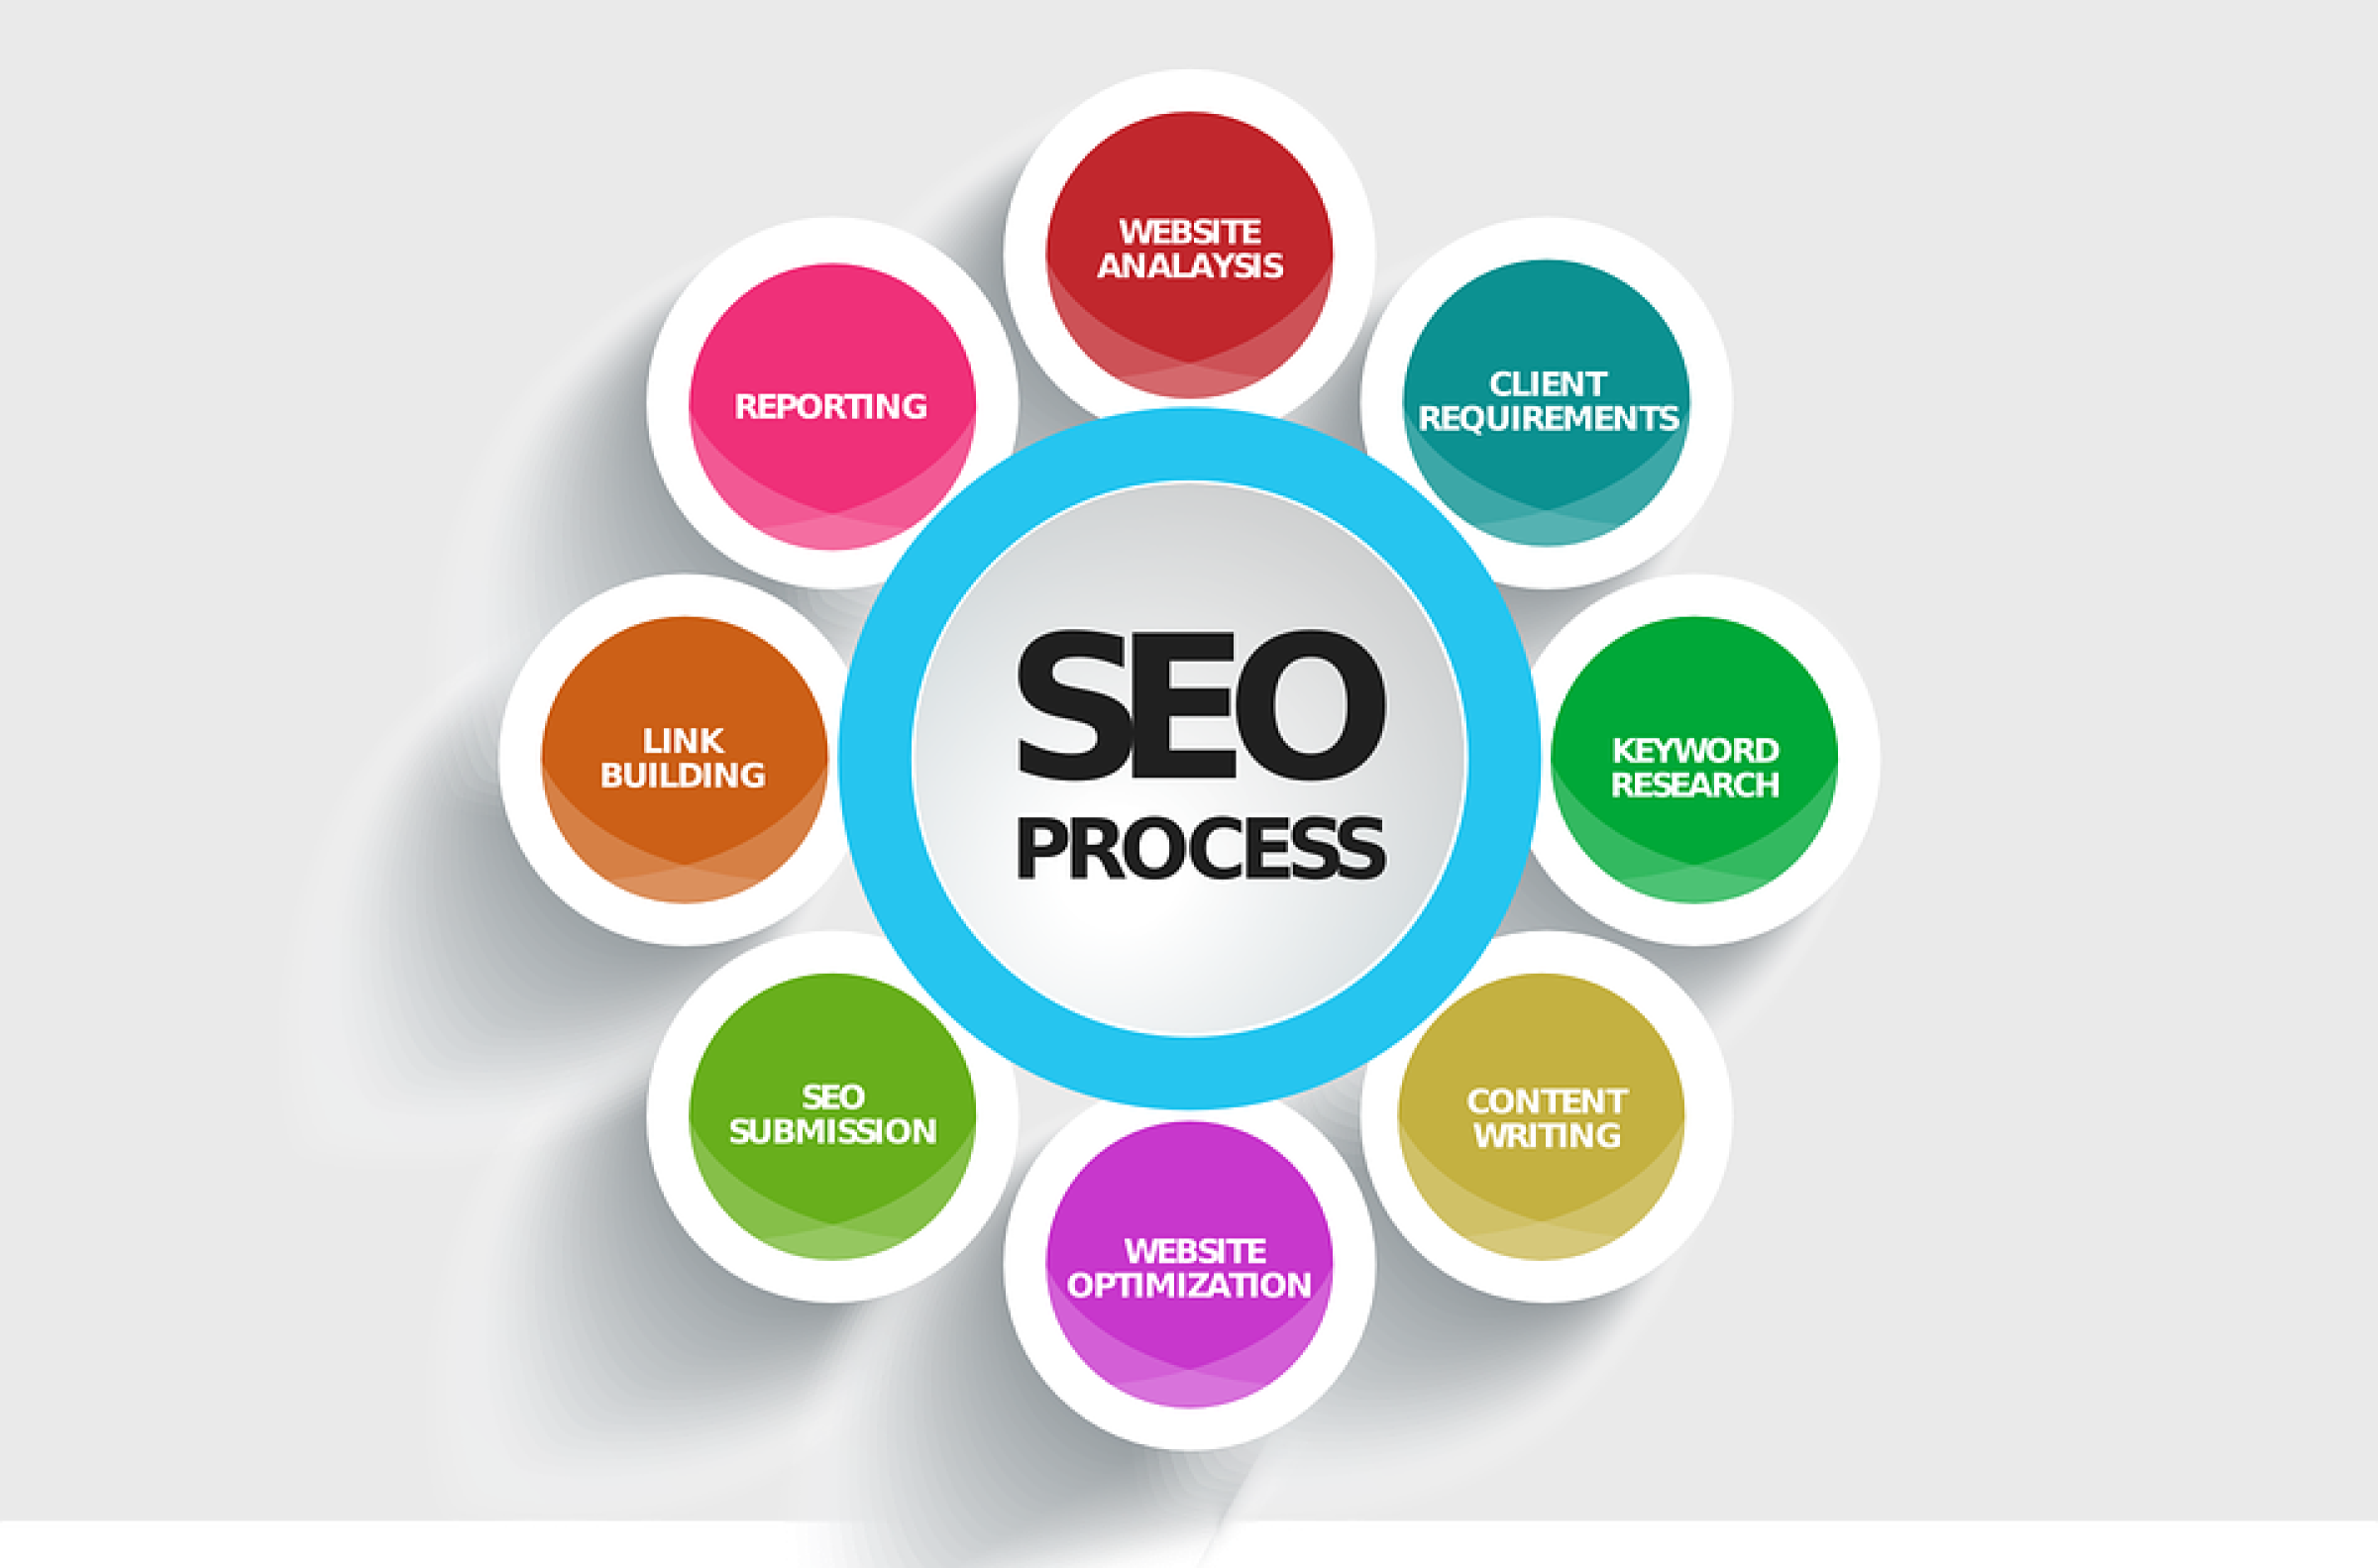 Importance of using SEO tools for website optimization